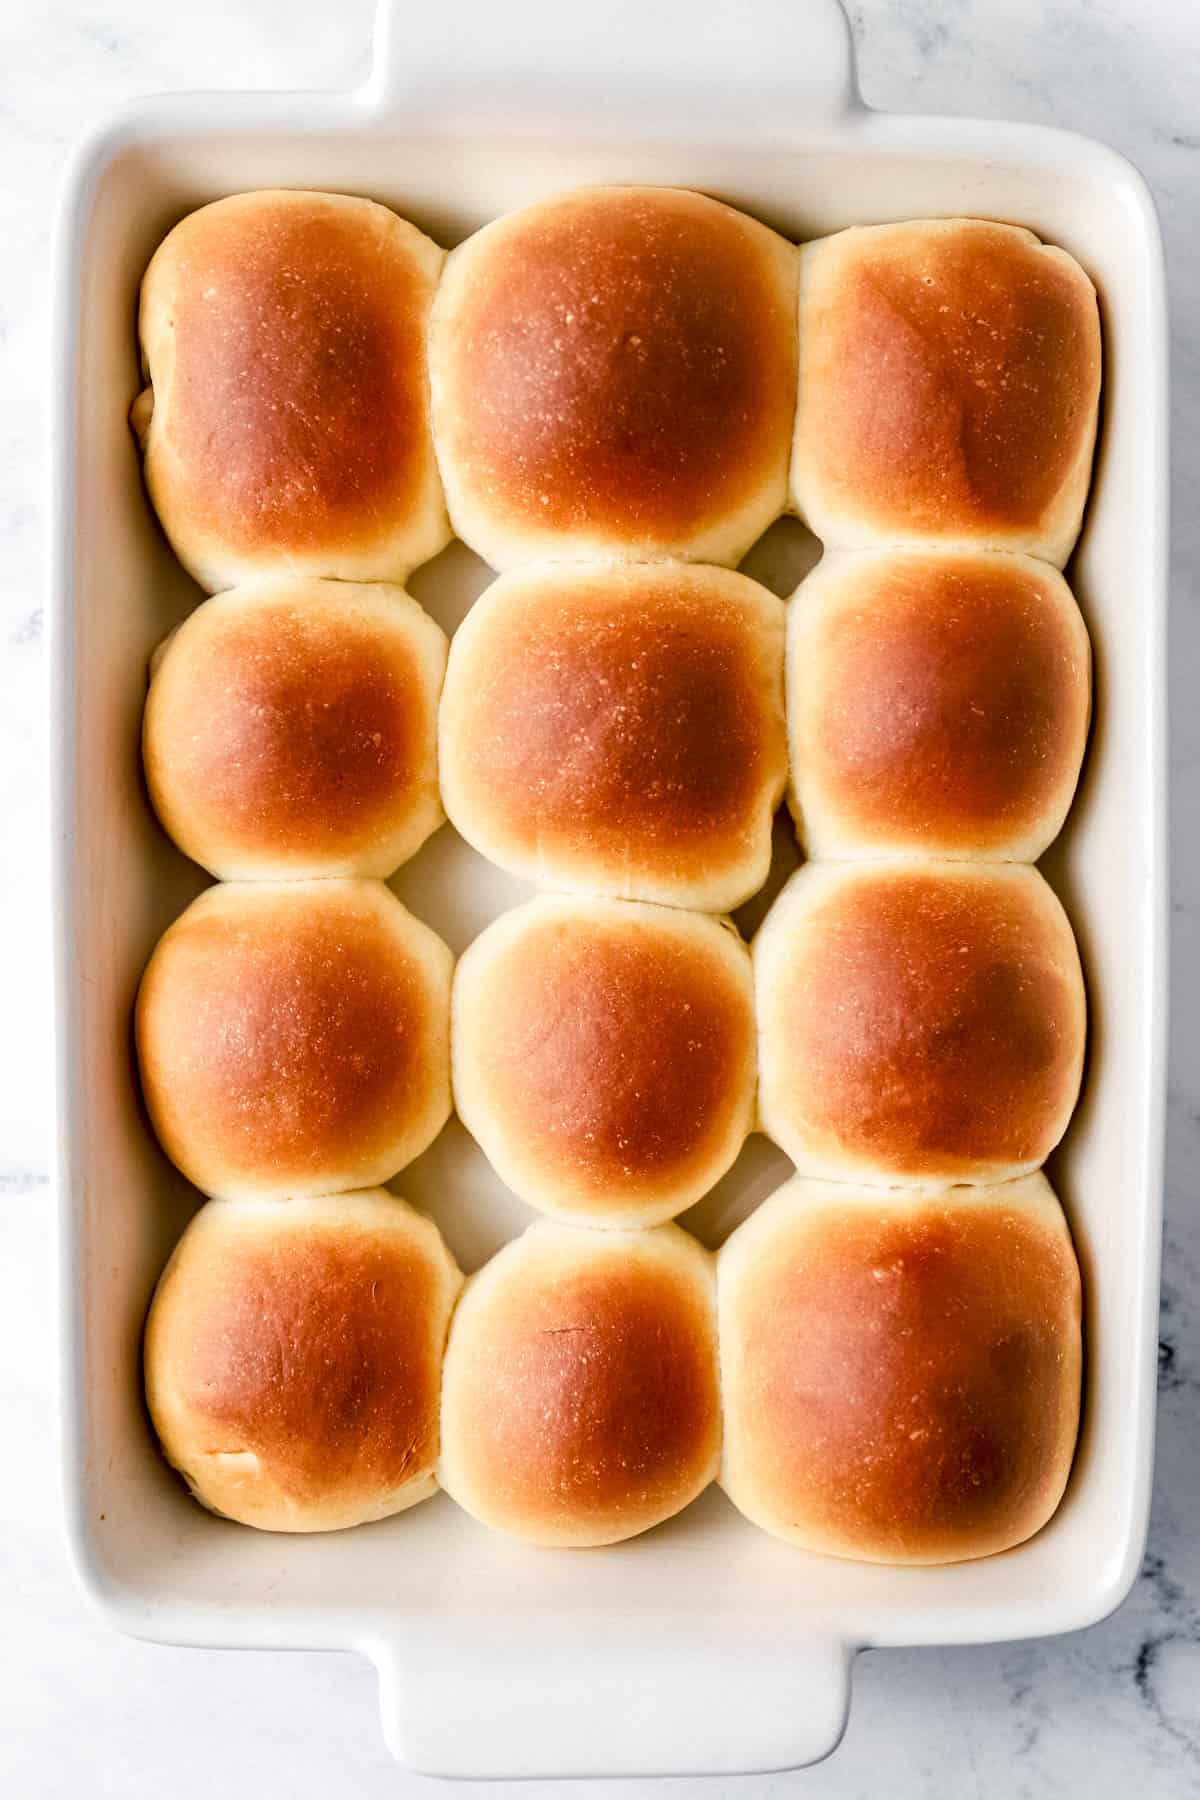 Overhead view of baked rolls in rectangle baking dish on marble surface. 